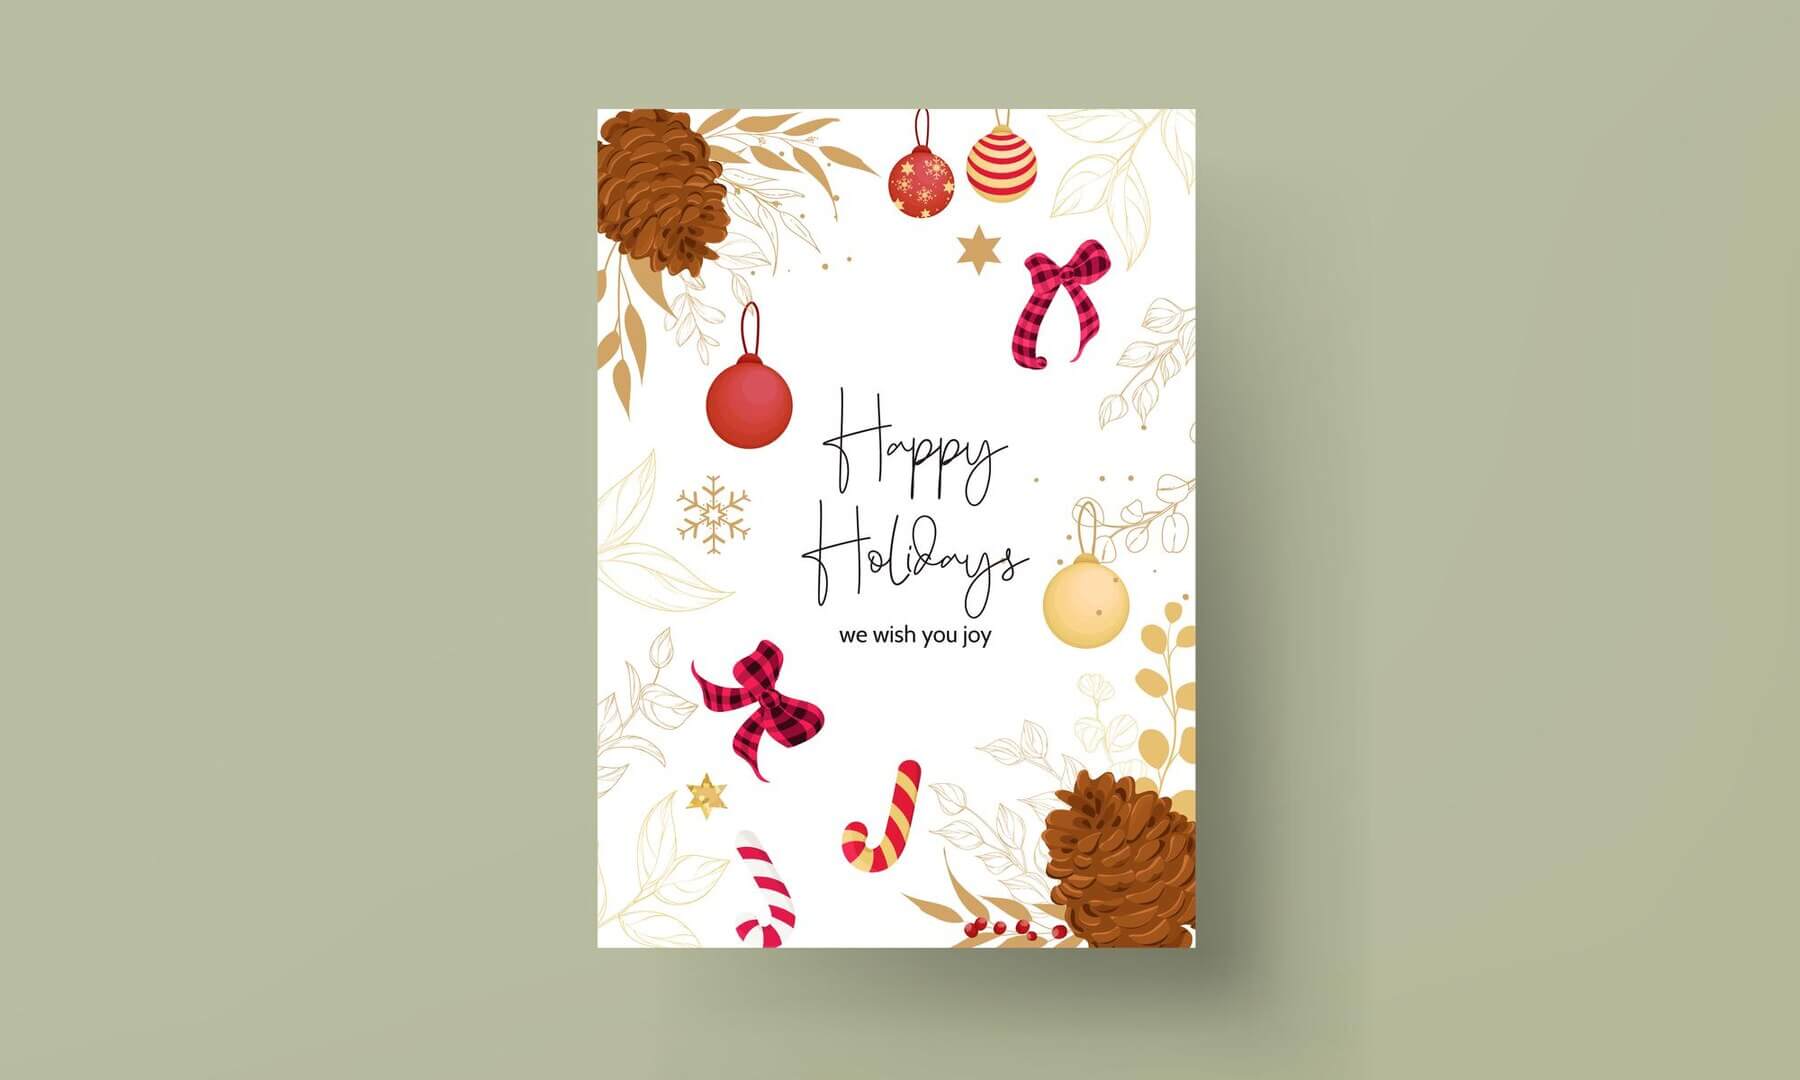 Happy Holidays Quotes